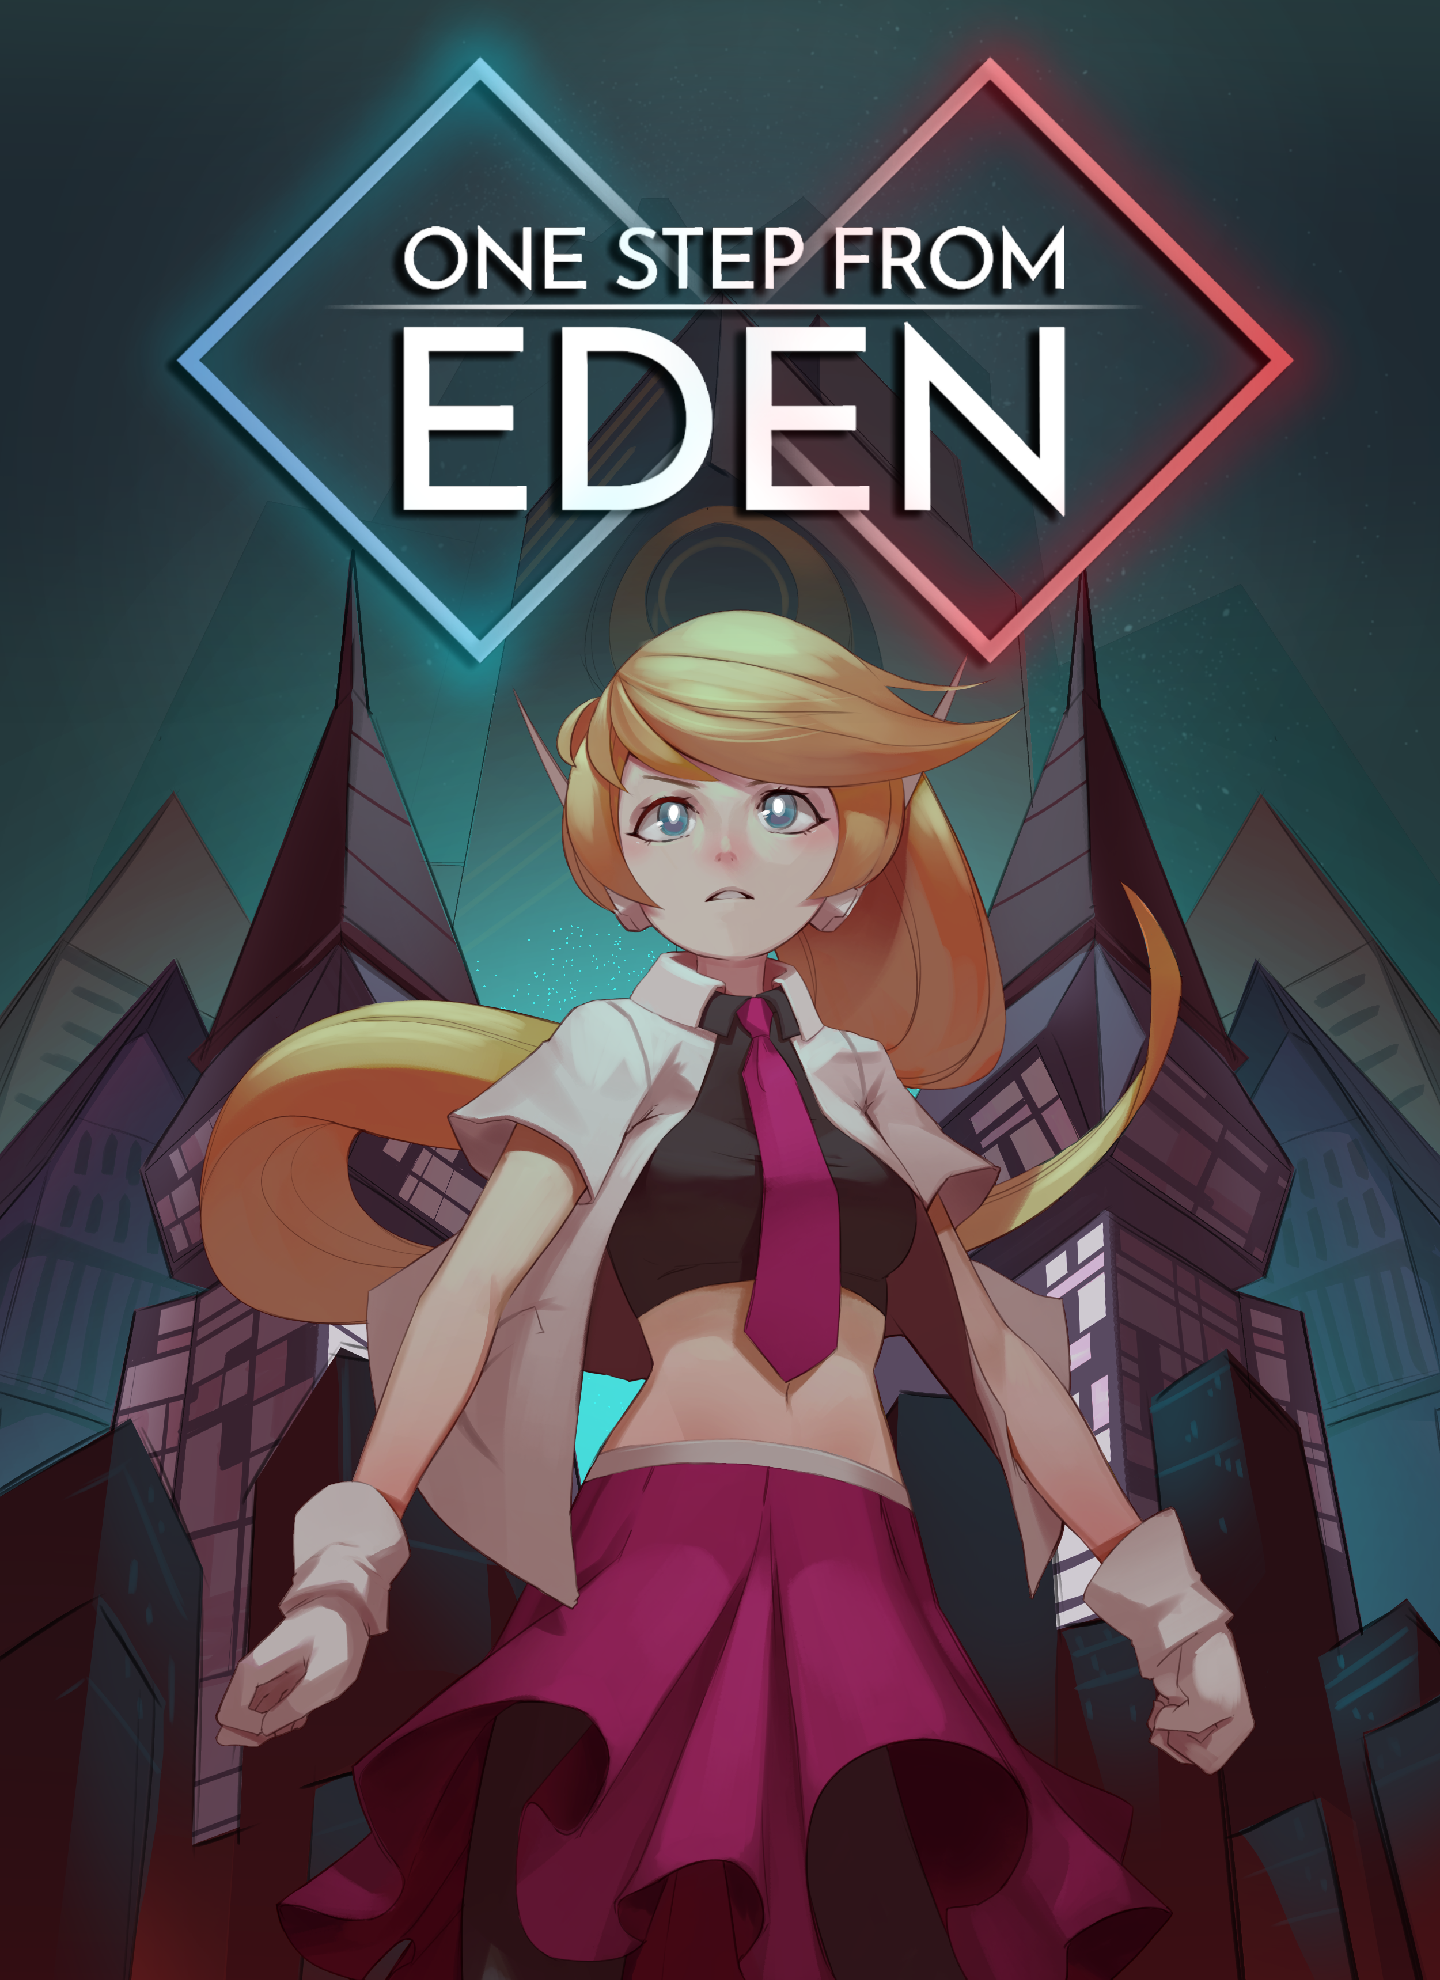 One Step From Eden Windows, Mac, Switch game - Indie DB - 1440 x 1980 png 1758kB